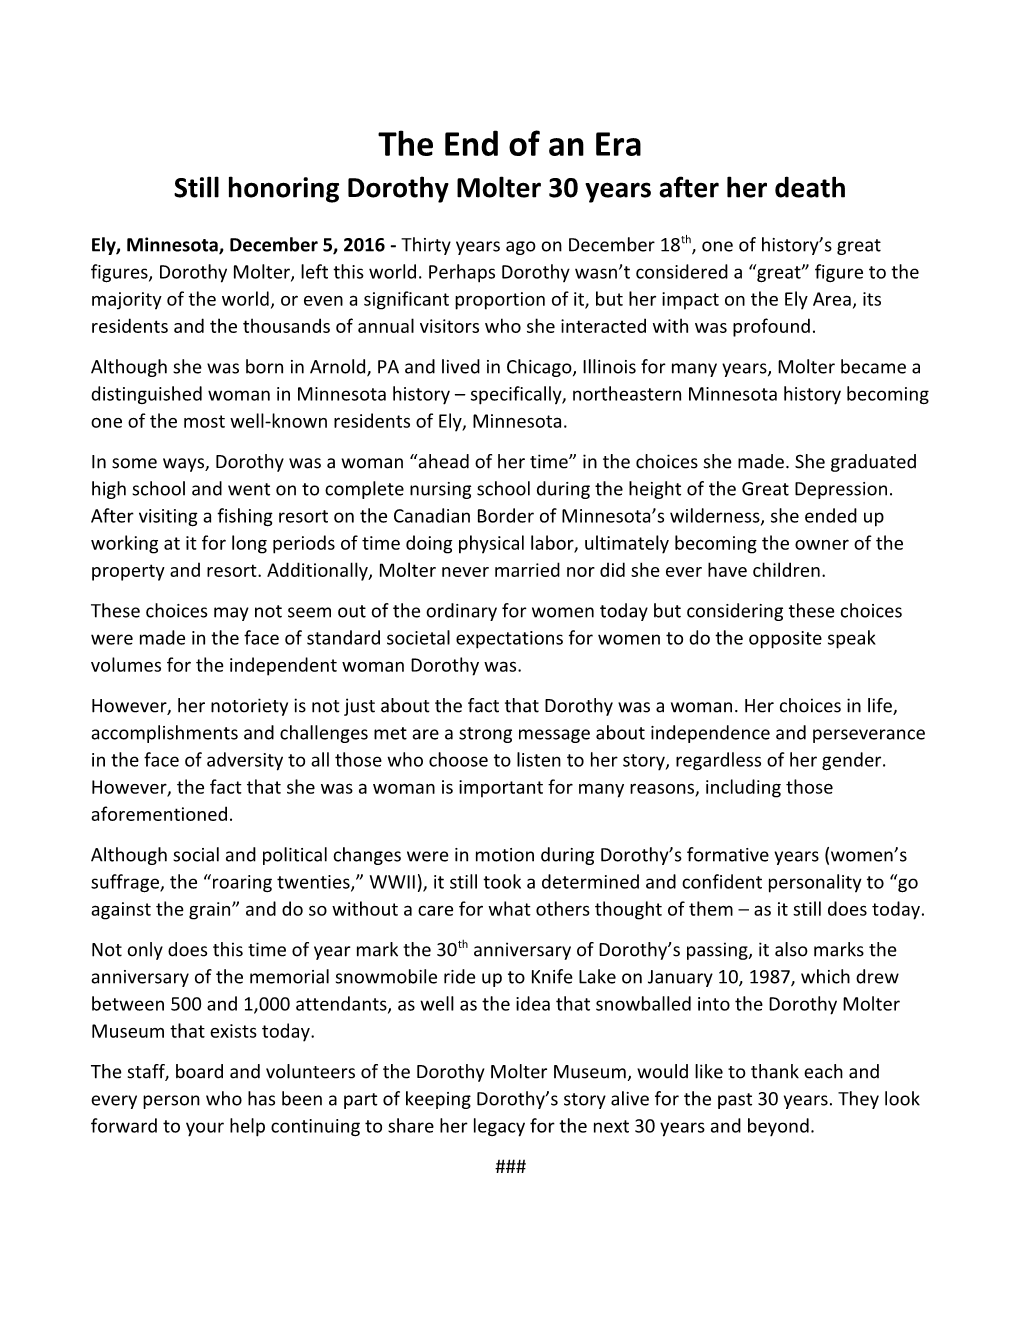 Still Honoring Dorothy Molter 30 Years After Her Death